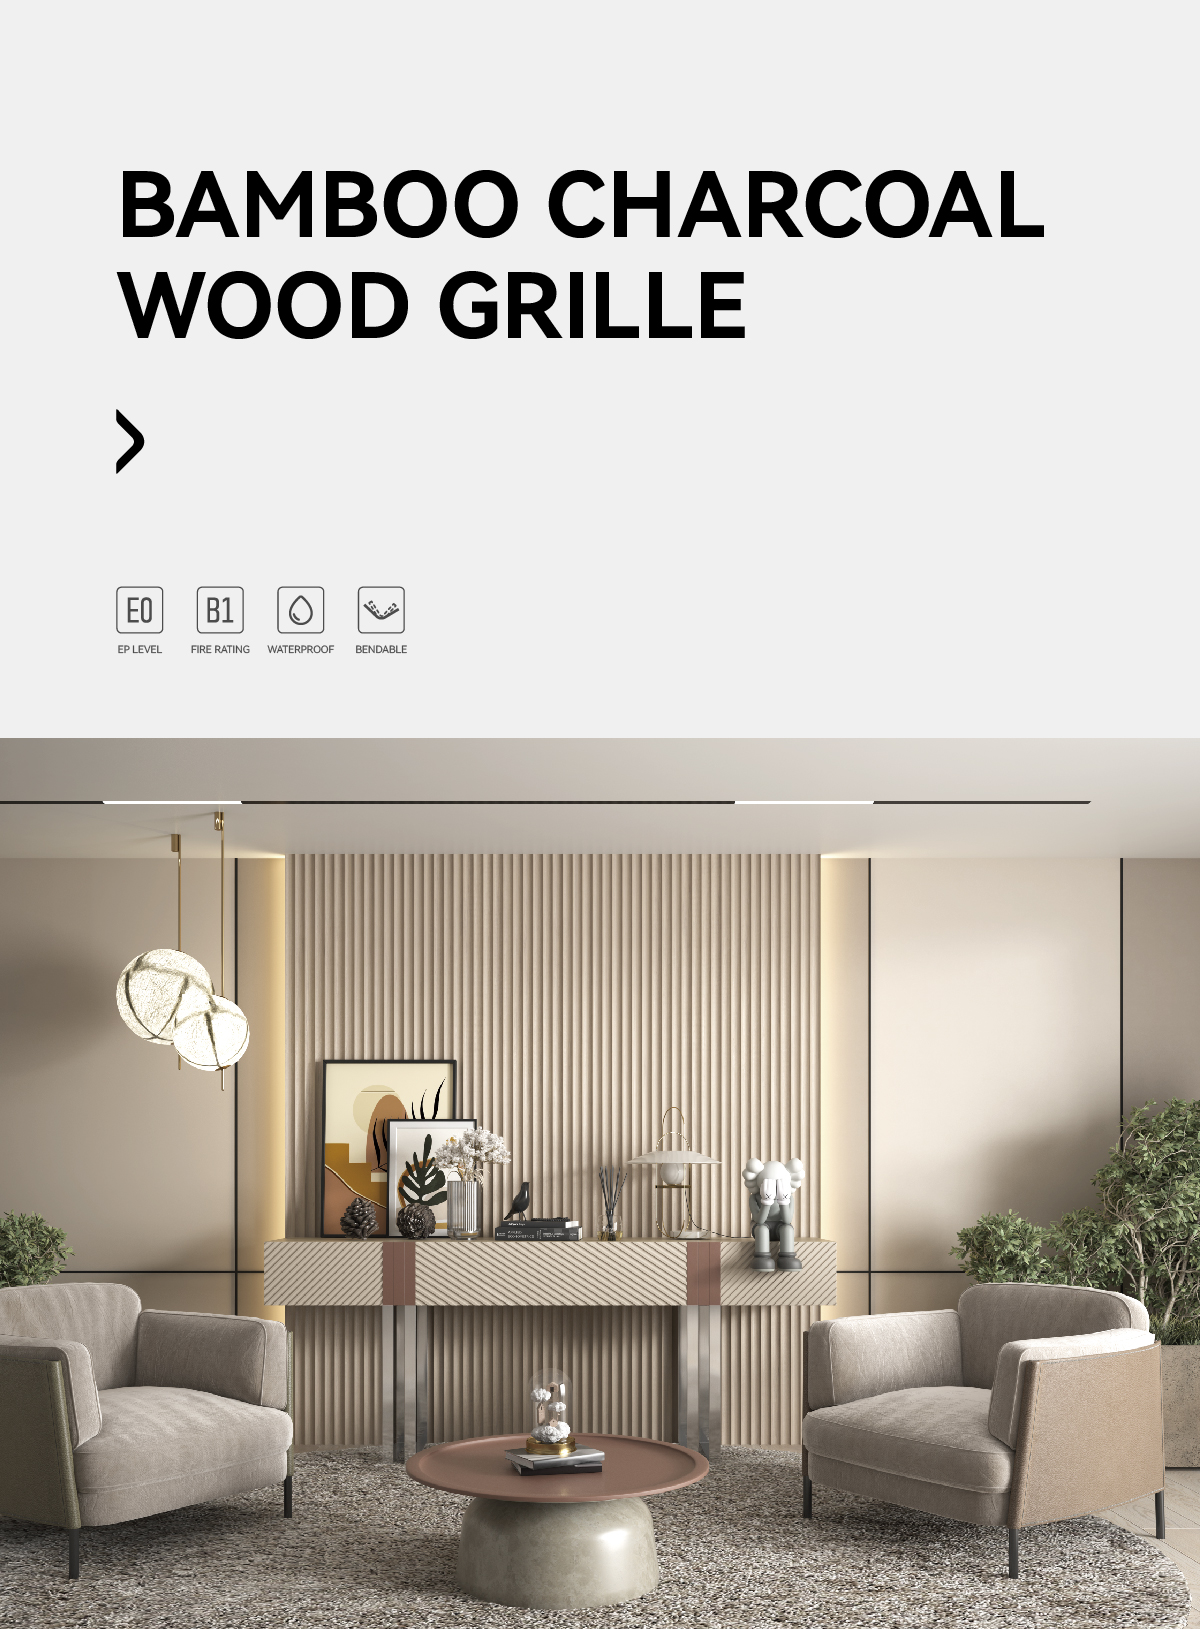 Bamboo charcoal wood grille-01